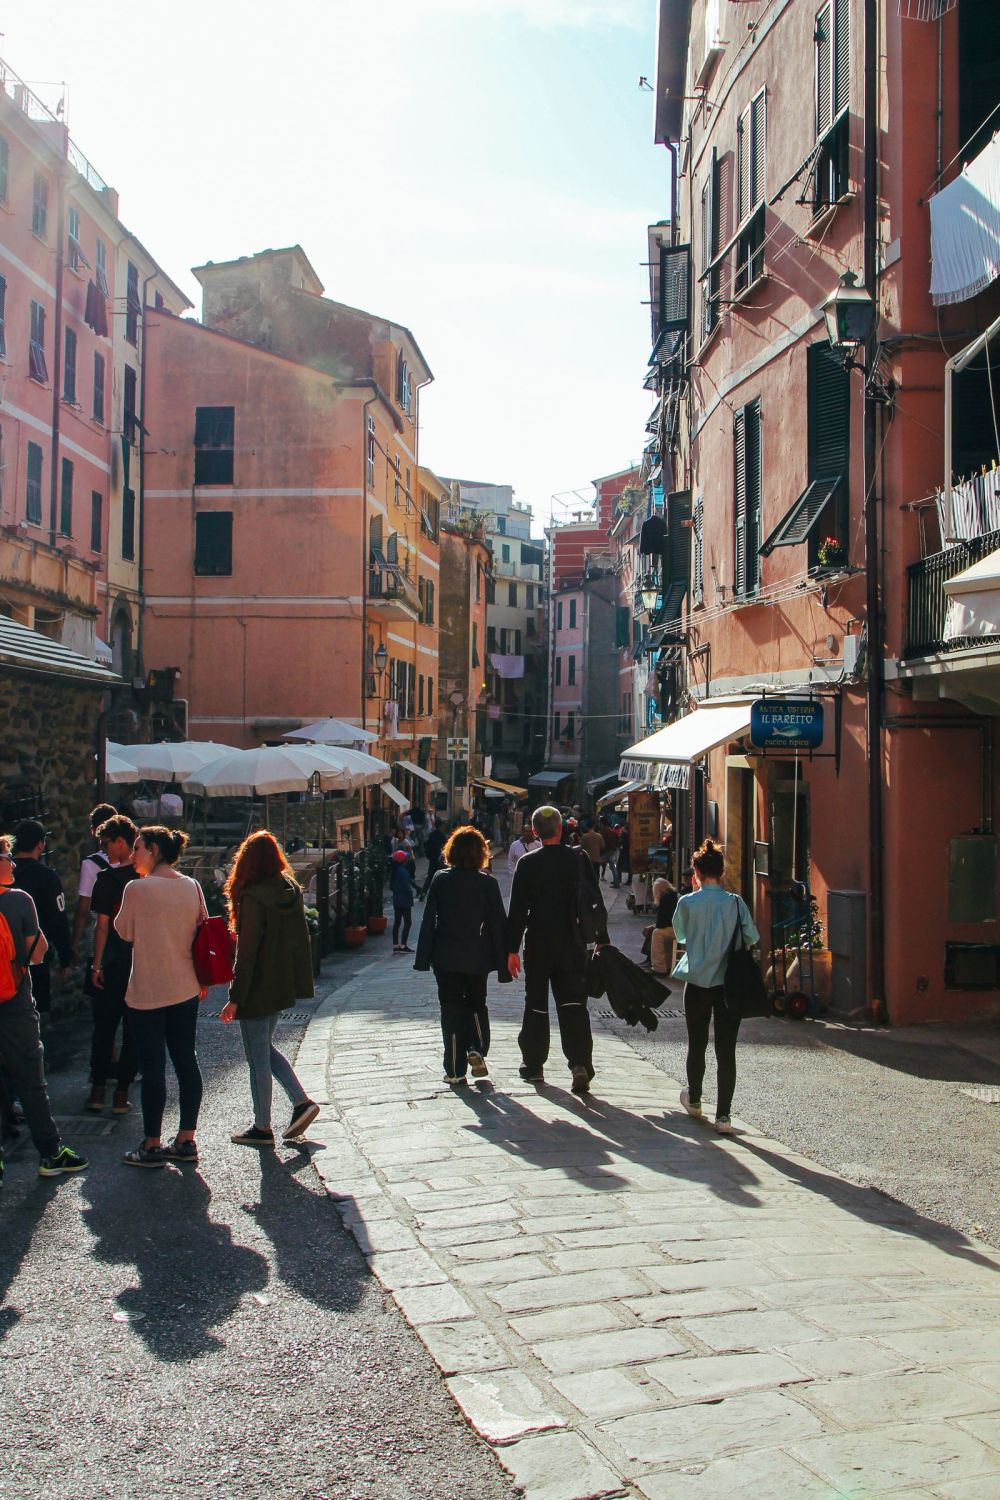 Vernazza in Cinque Terre, Italy - The Photo Diary! [4 of 5] (32)